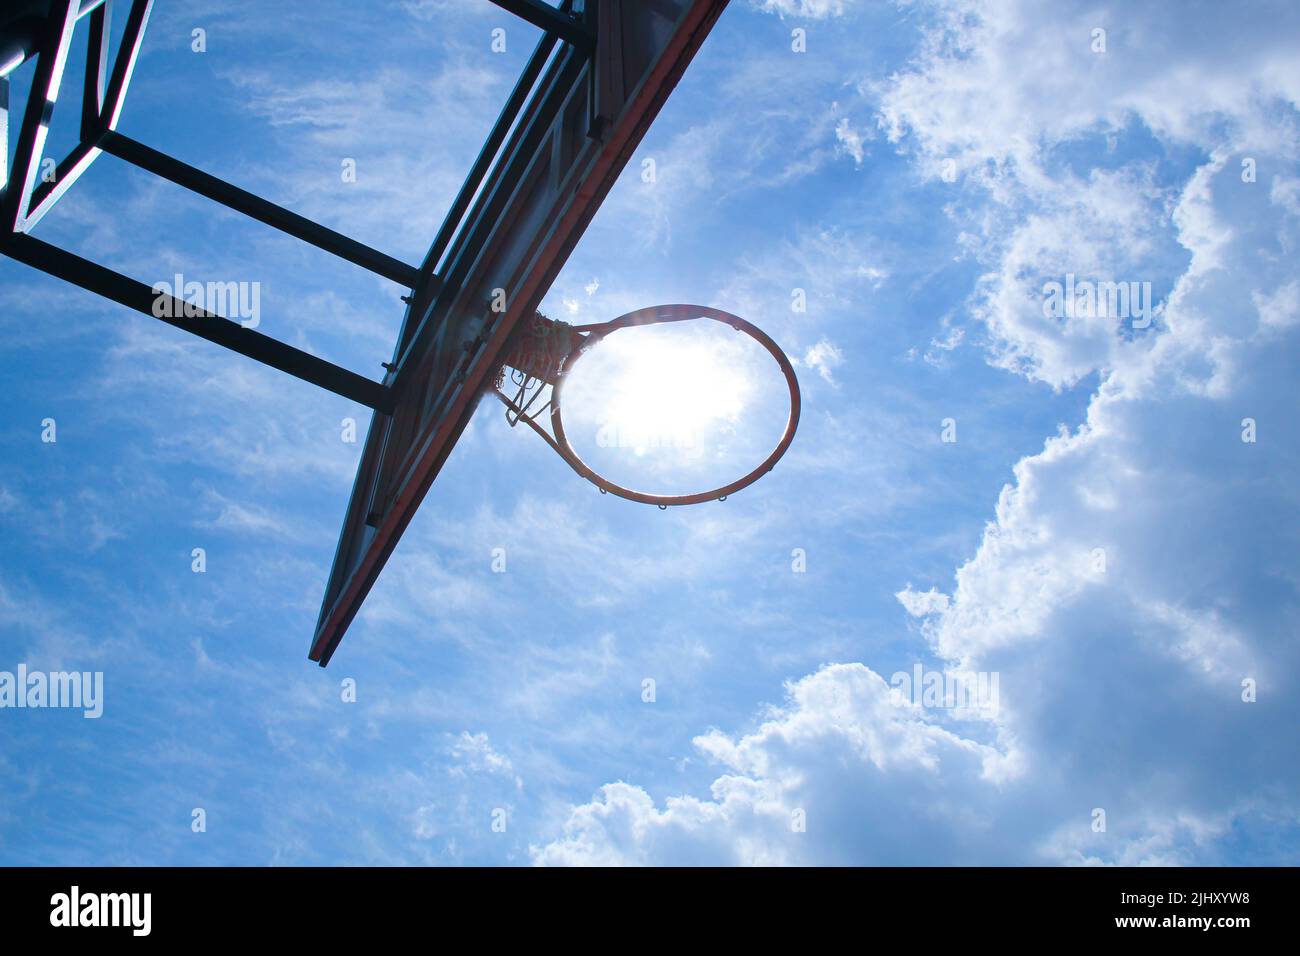 Basketball ring on the background a blue sky with white clouds and bright sun. Basketball hoop on a shield on an outdoor sports ground. Basketball equ Stock Photo